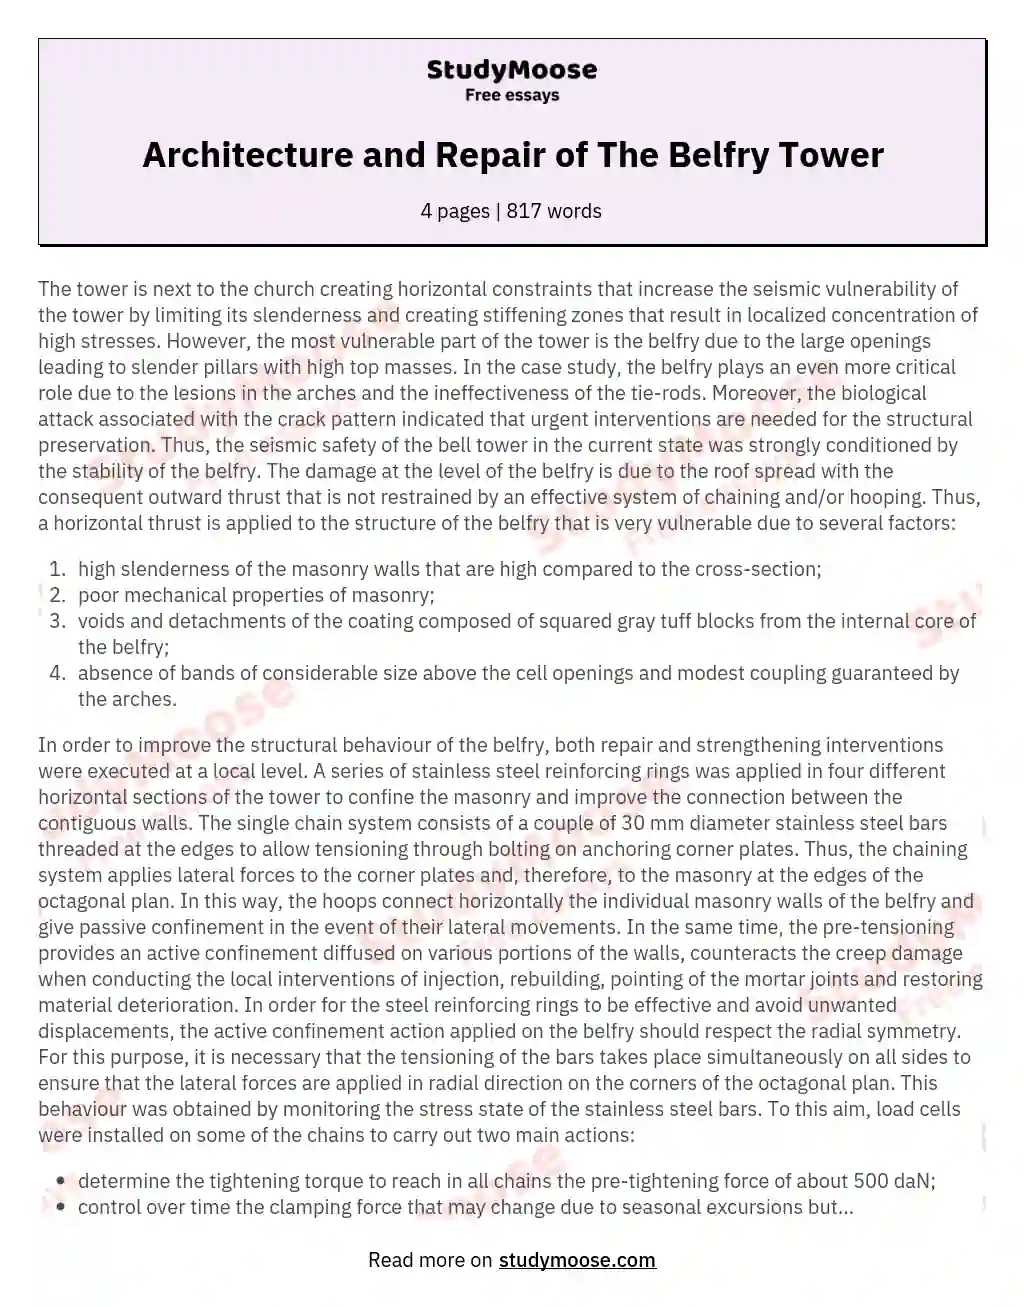 Architecture and Repair of The Belfry Tower essay